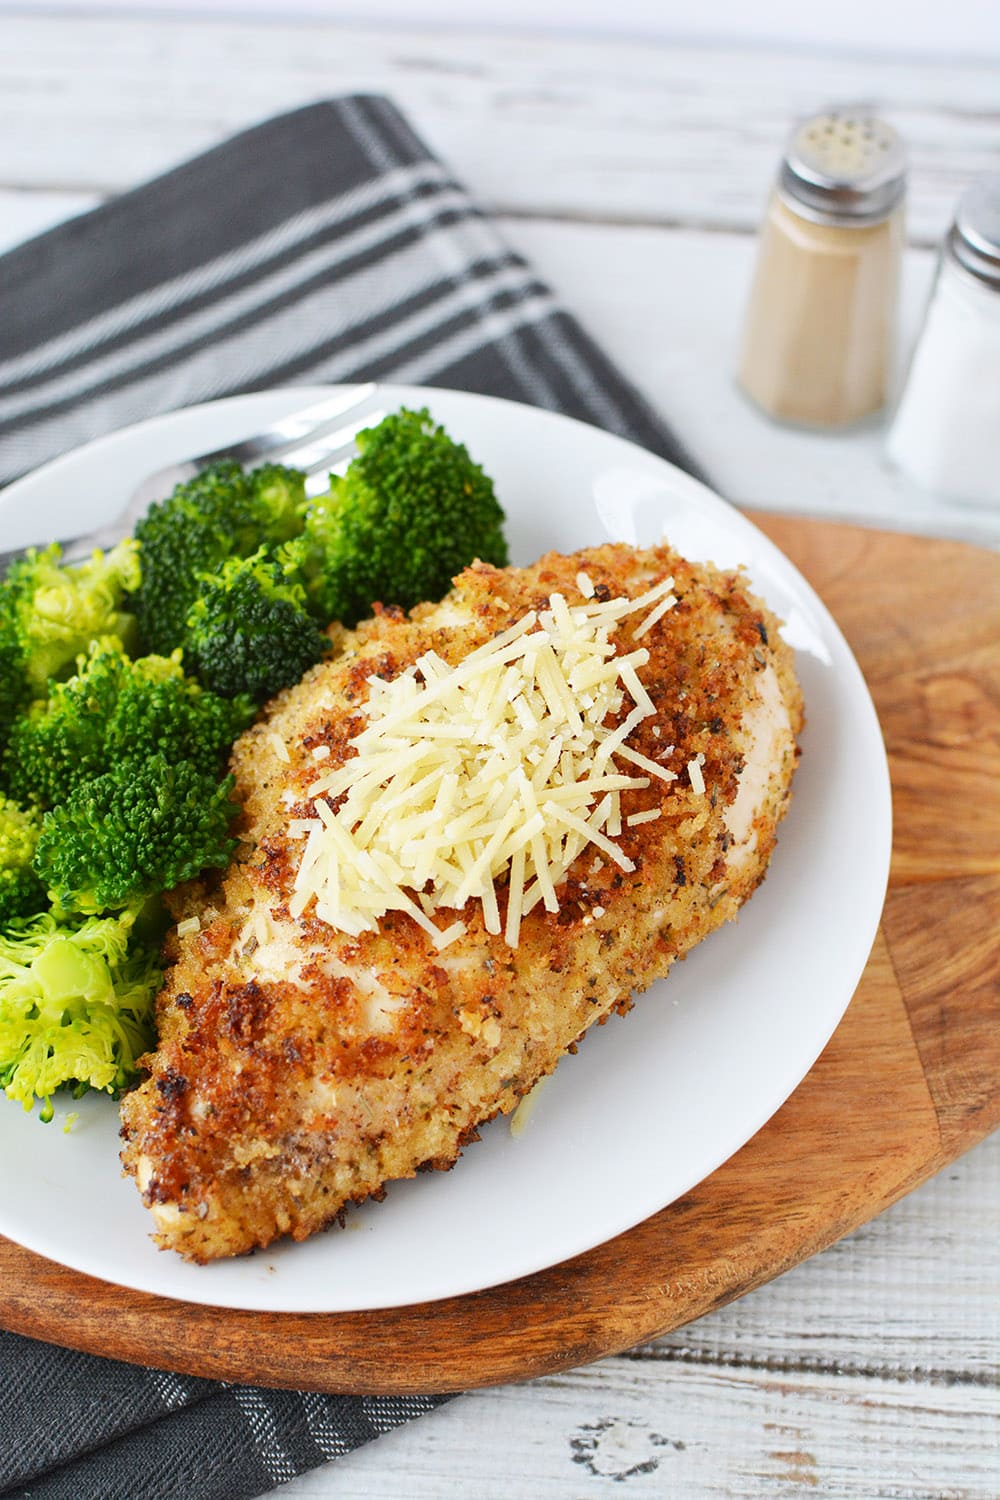 Herb crusted chicken and broccoli dinner on a plate